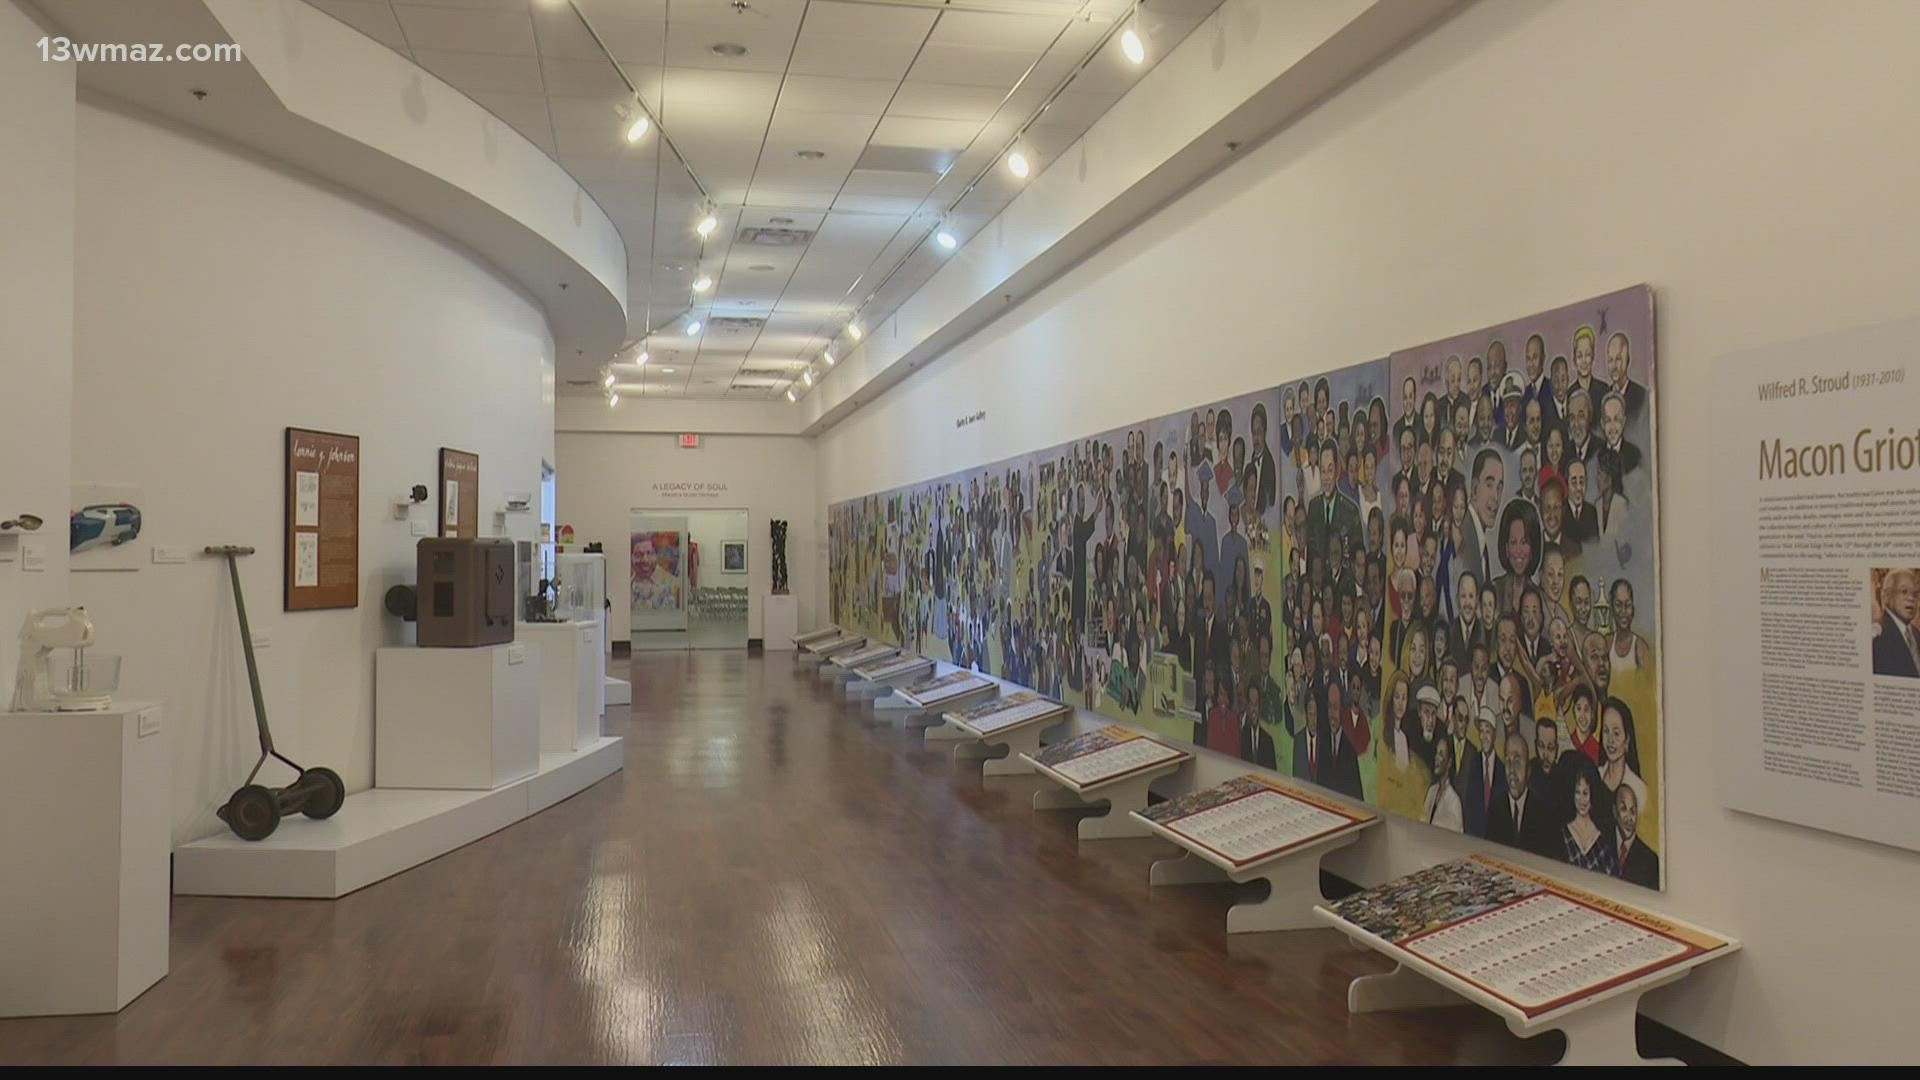 Museum curator Jeffrey Bruce says they suspended the program due to resources, but they're excited to bring it back